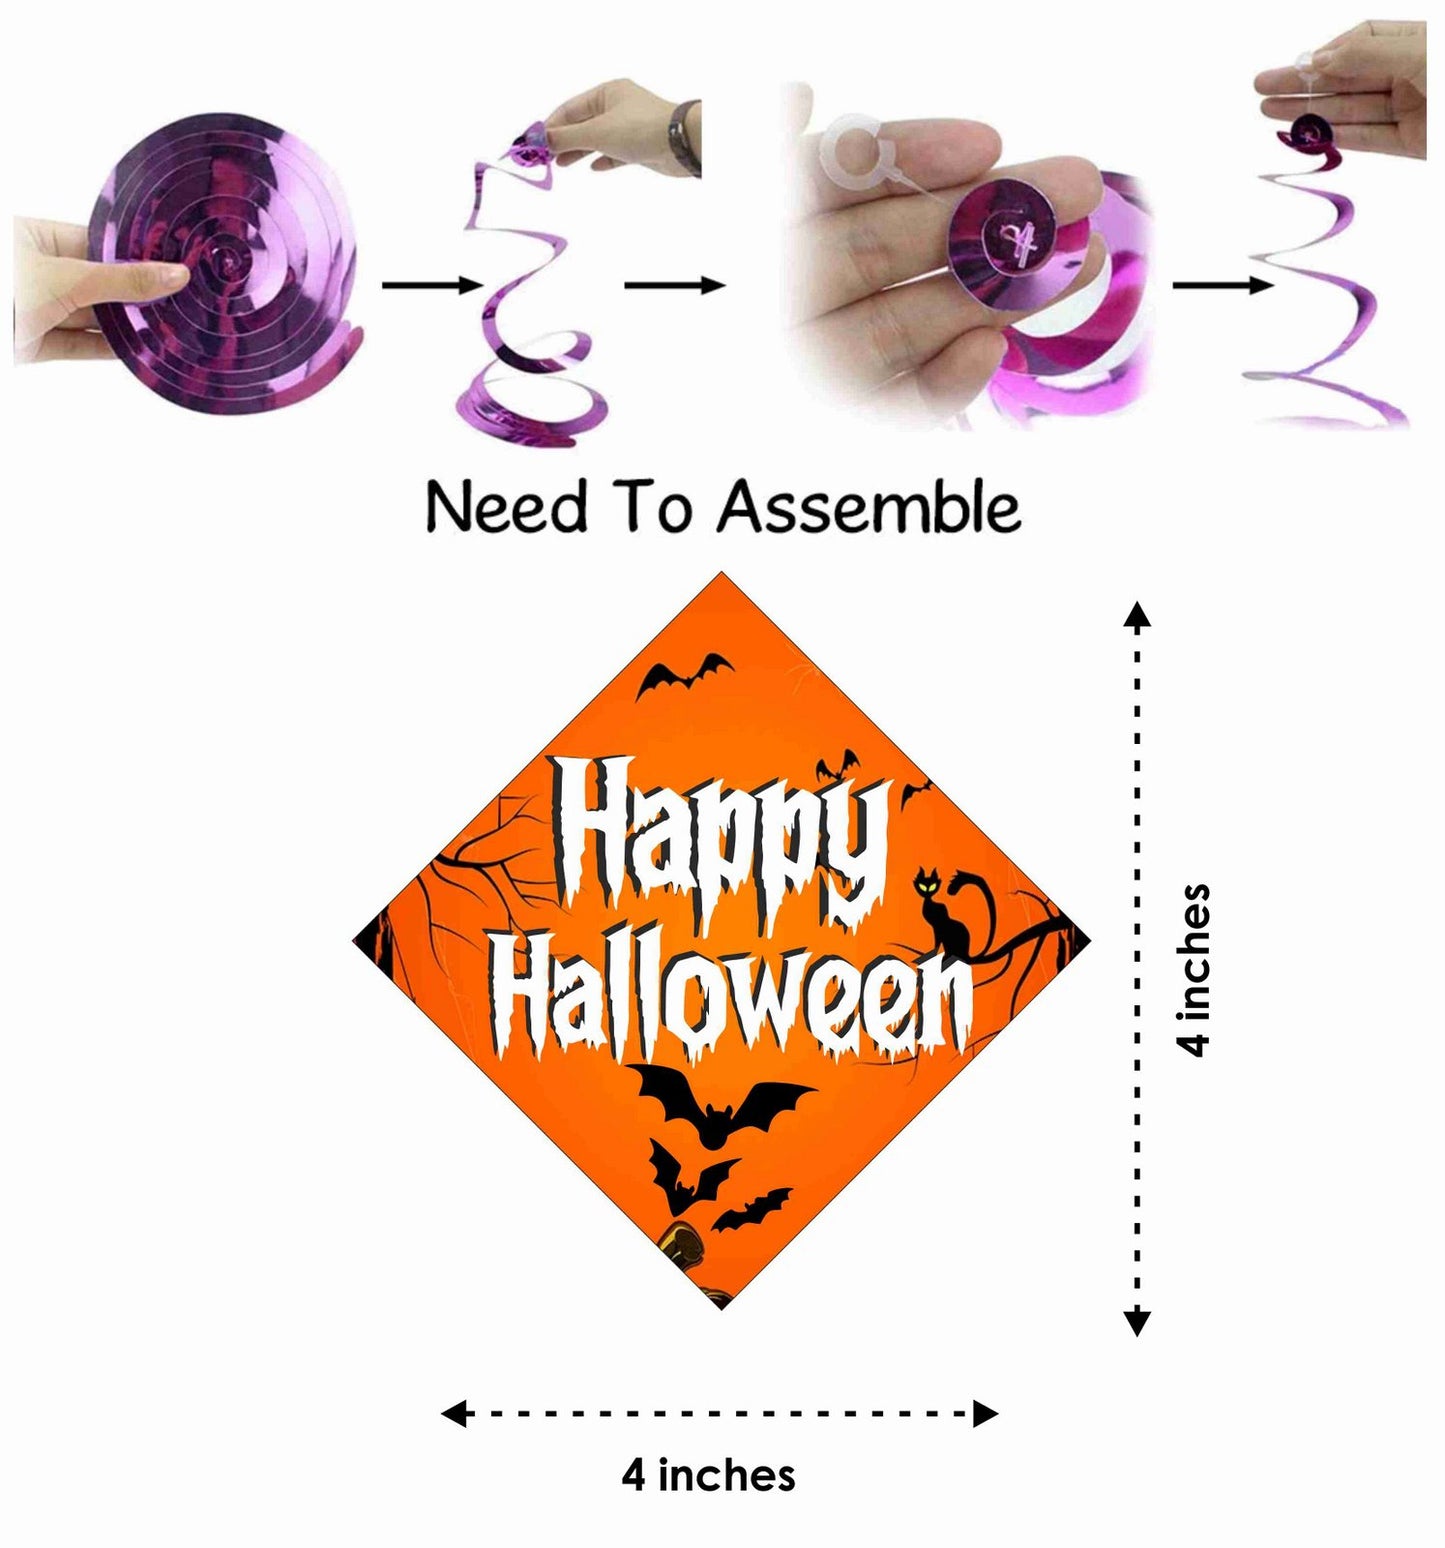 Halloween Ceiling Hanging Swirls Decorations Cutout Festive Party Supplies (Pack of 6 swirls and cutout)